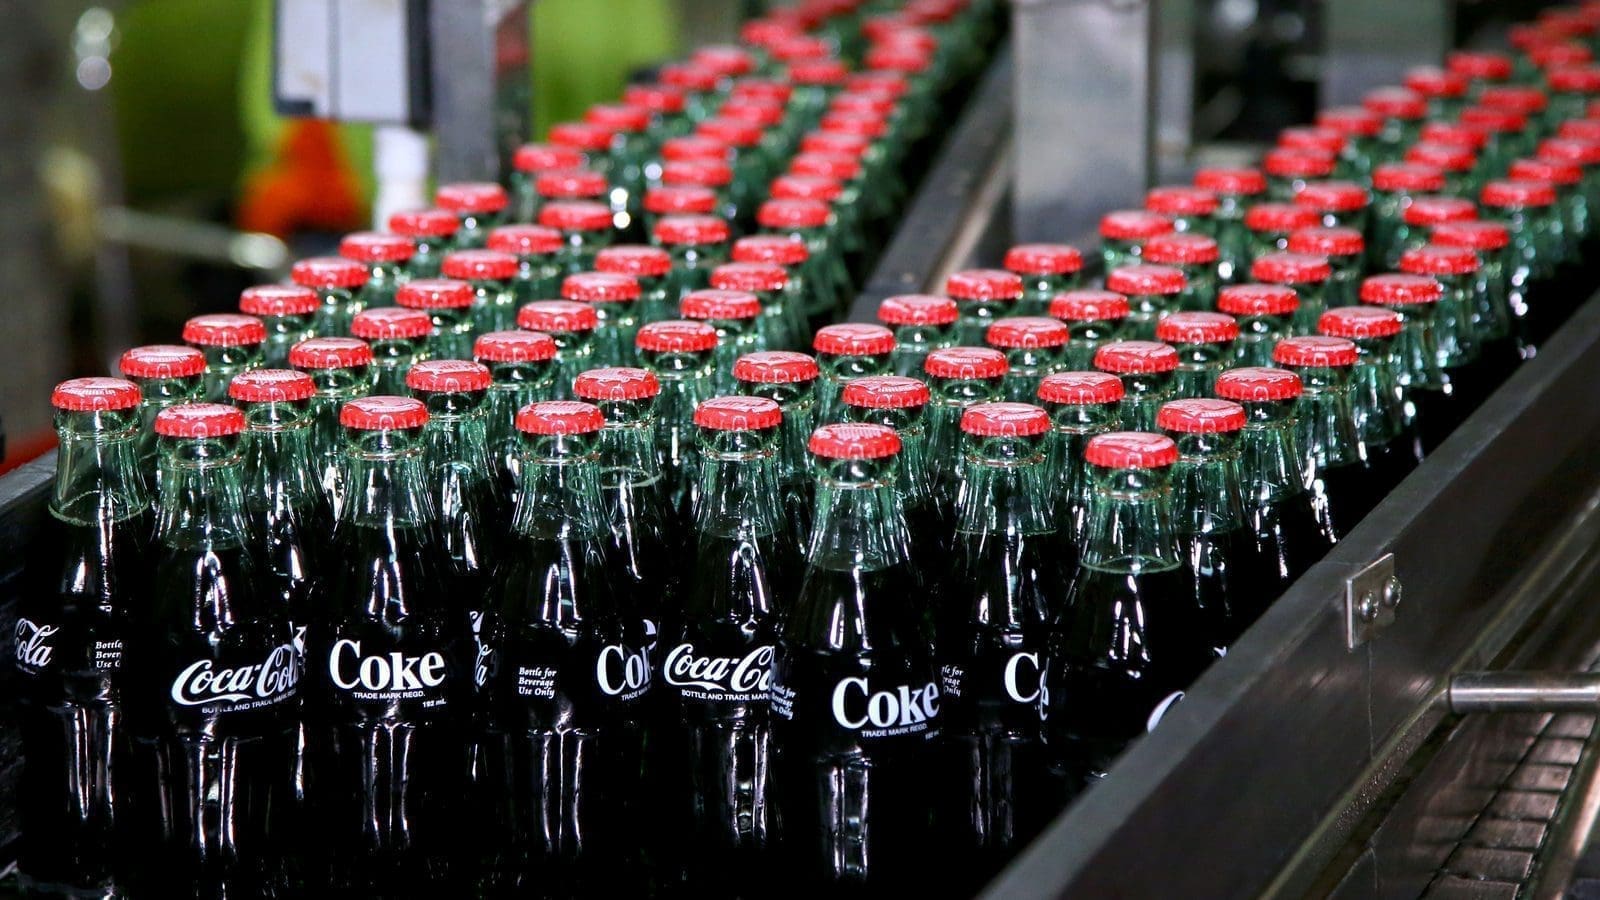 The Coca-Cola Company, Castel Group part ways, bestows bottling rights to new partner in Gabon